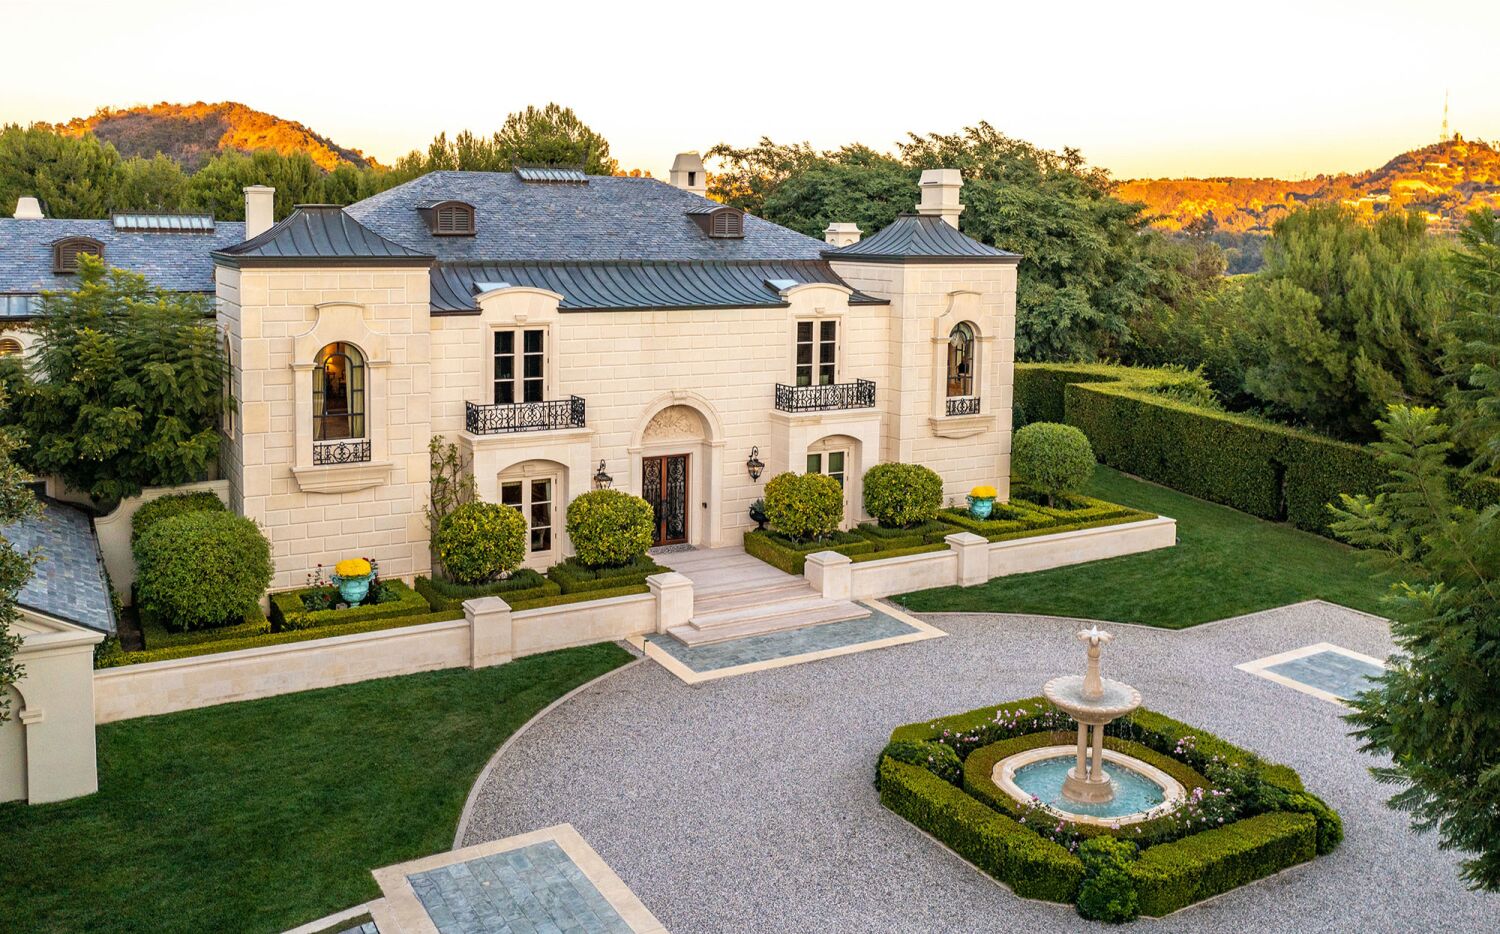 California Pizza Kitchen founder lists Beverly Park estate for $48.5 million